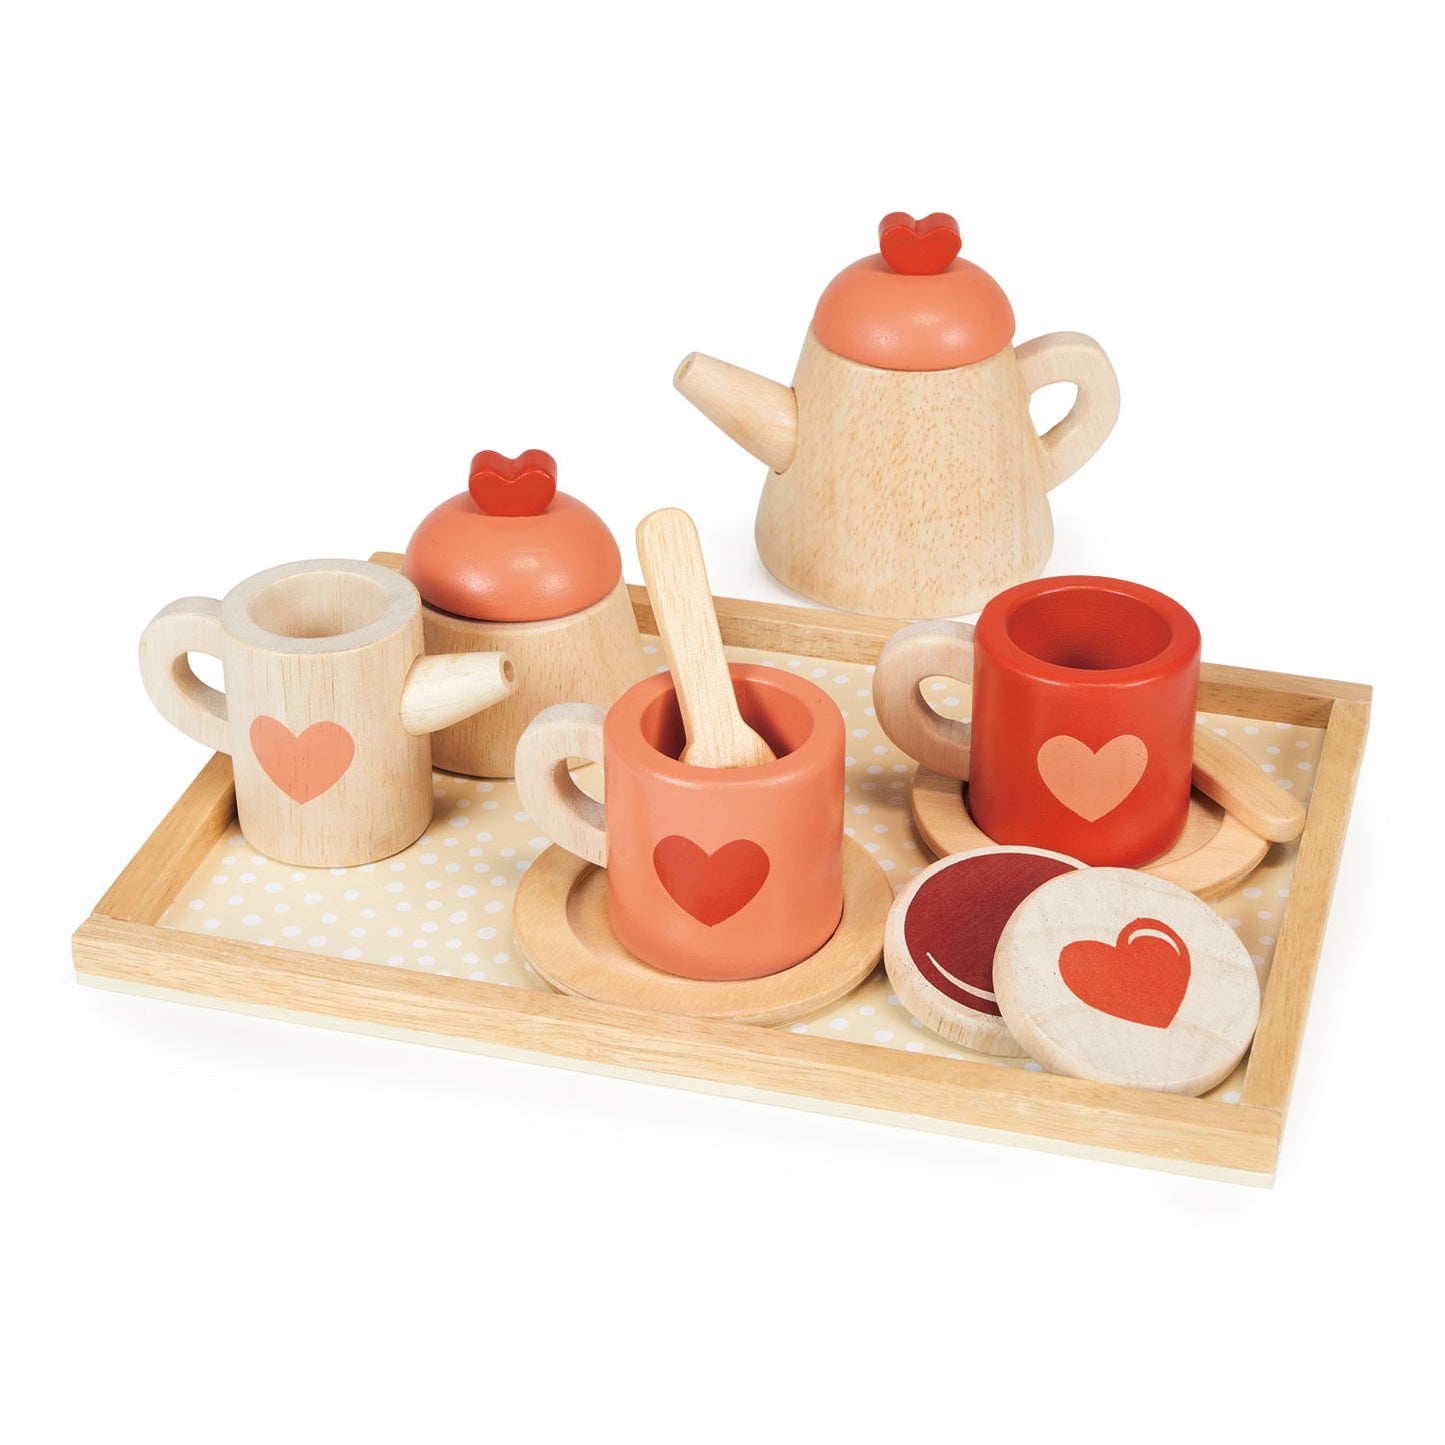 Wooden Tea Time Tray Set by Mentari